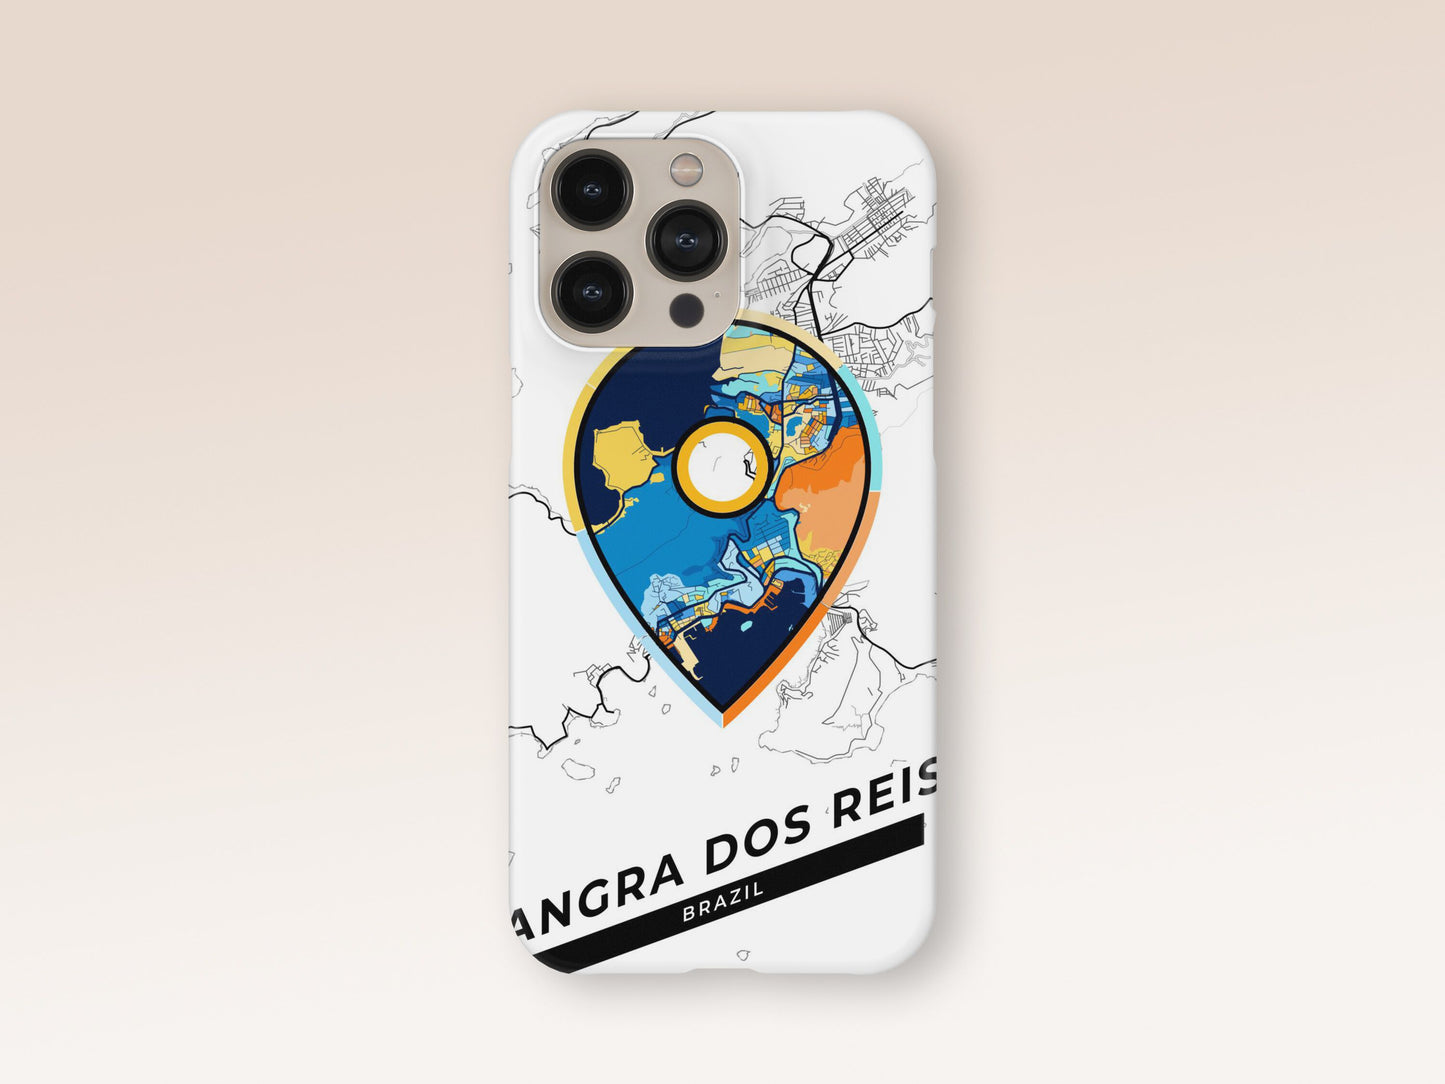 Angra Dos Reis Brazil slim phone case with colorful icon. Birthday, wedding or housewarming gift. Couple match cases. 1